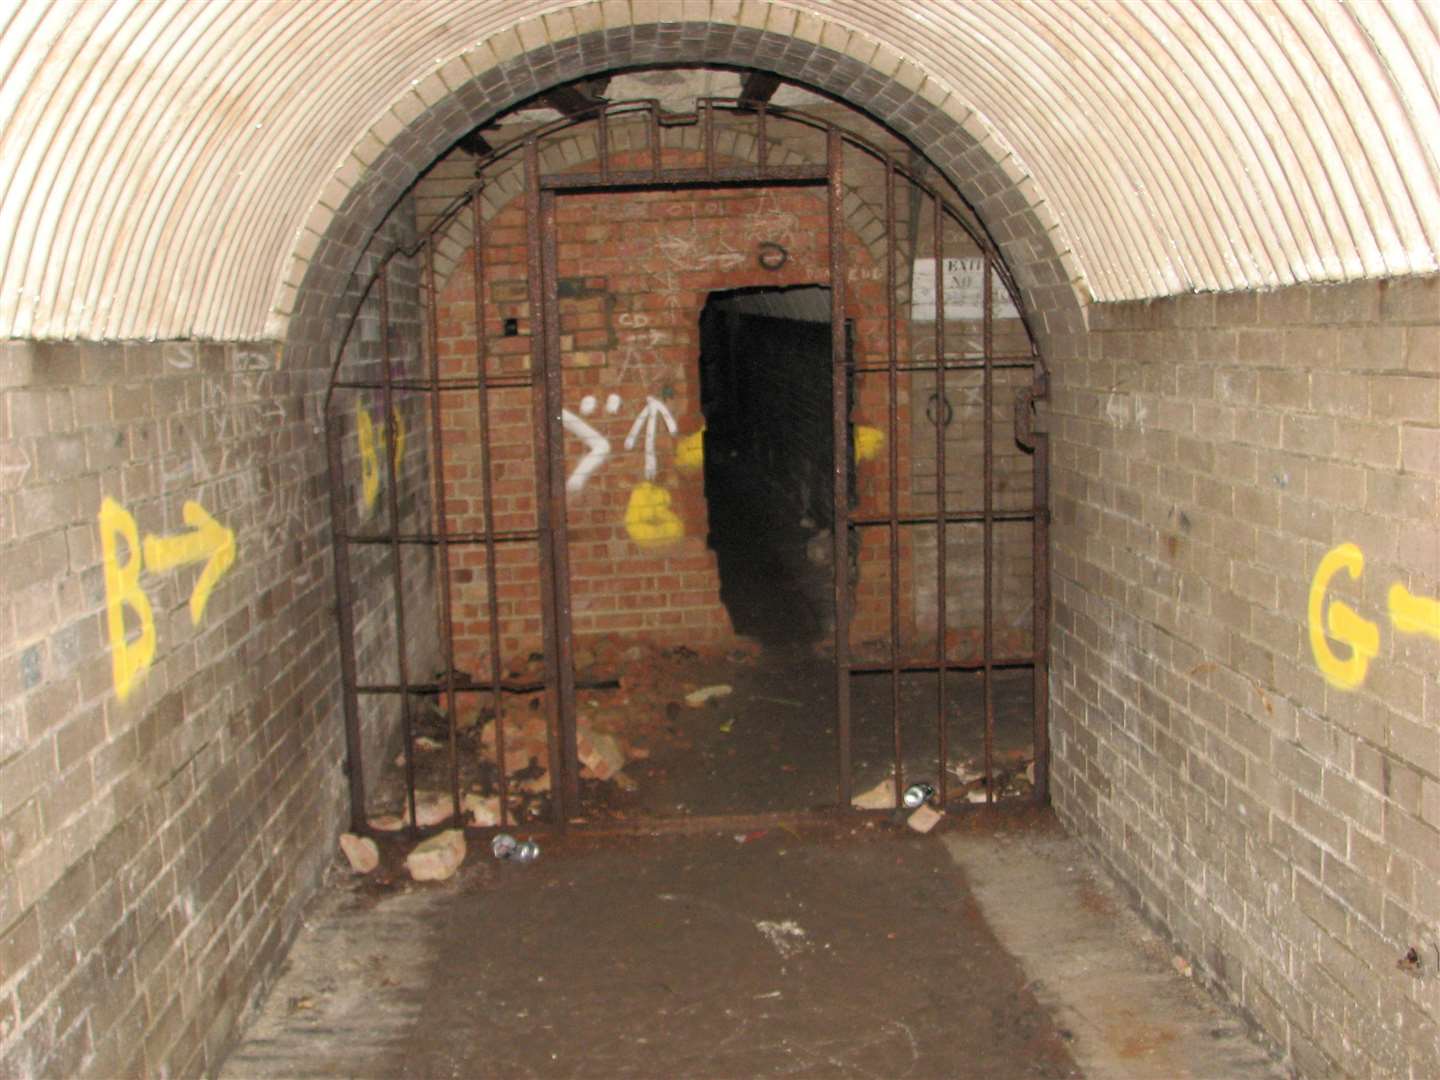 Inside the Short Brothers tunnels beneath Rochester